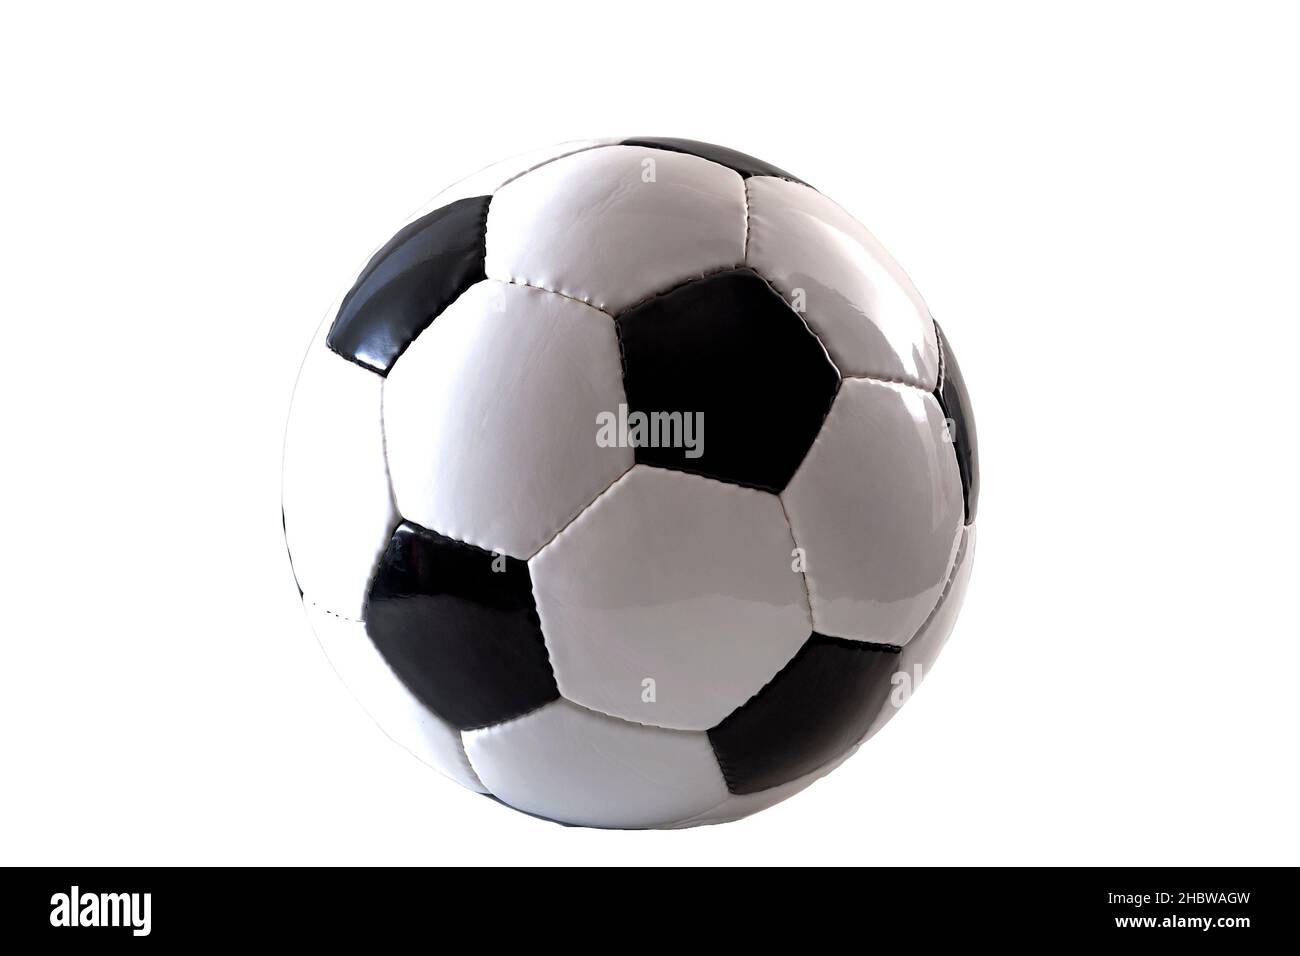 Sports equipment and leisure activity concept with a black and white generic classic leather football or soccer ball isolated on white background with Stock Photo